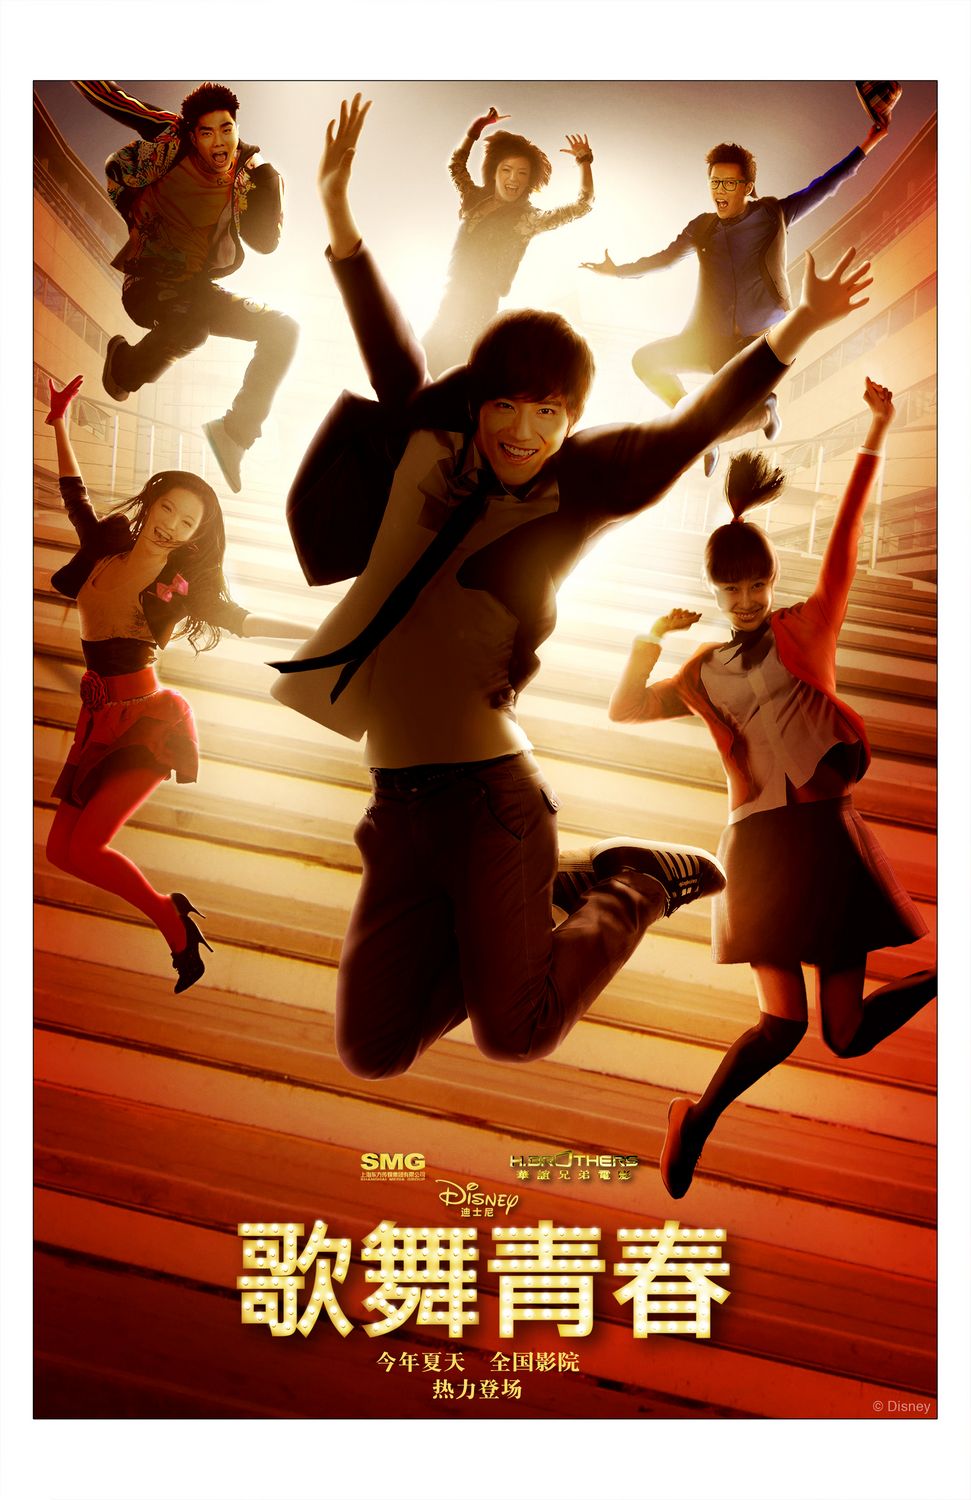 Extra Large Movie Poster Image for Disney High School Musical: China (#1 of 3)